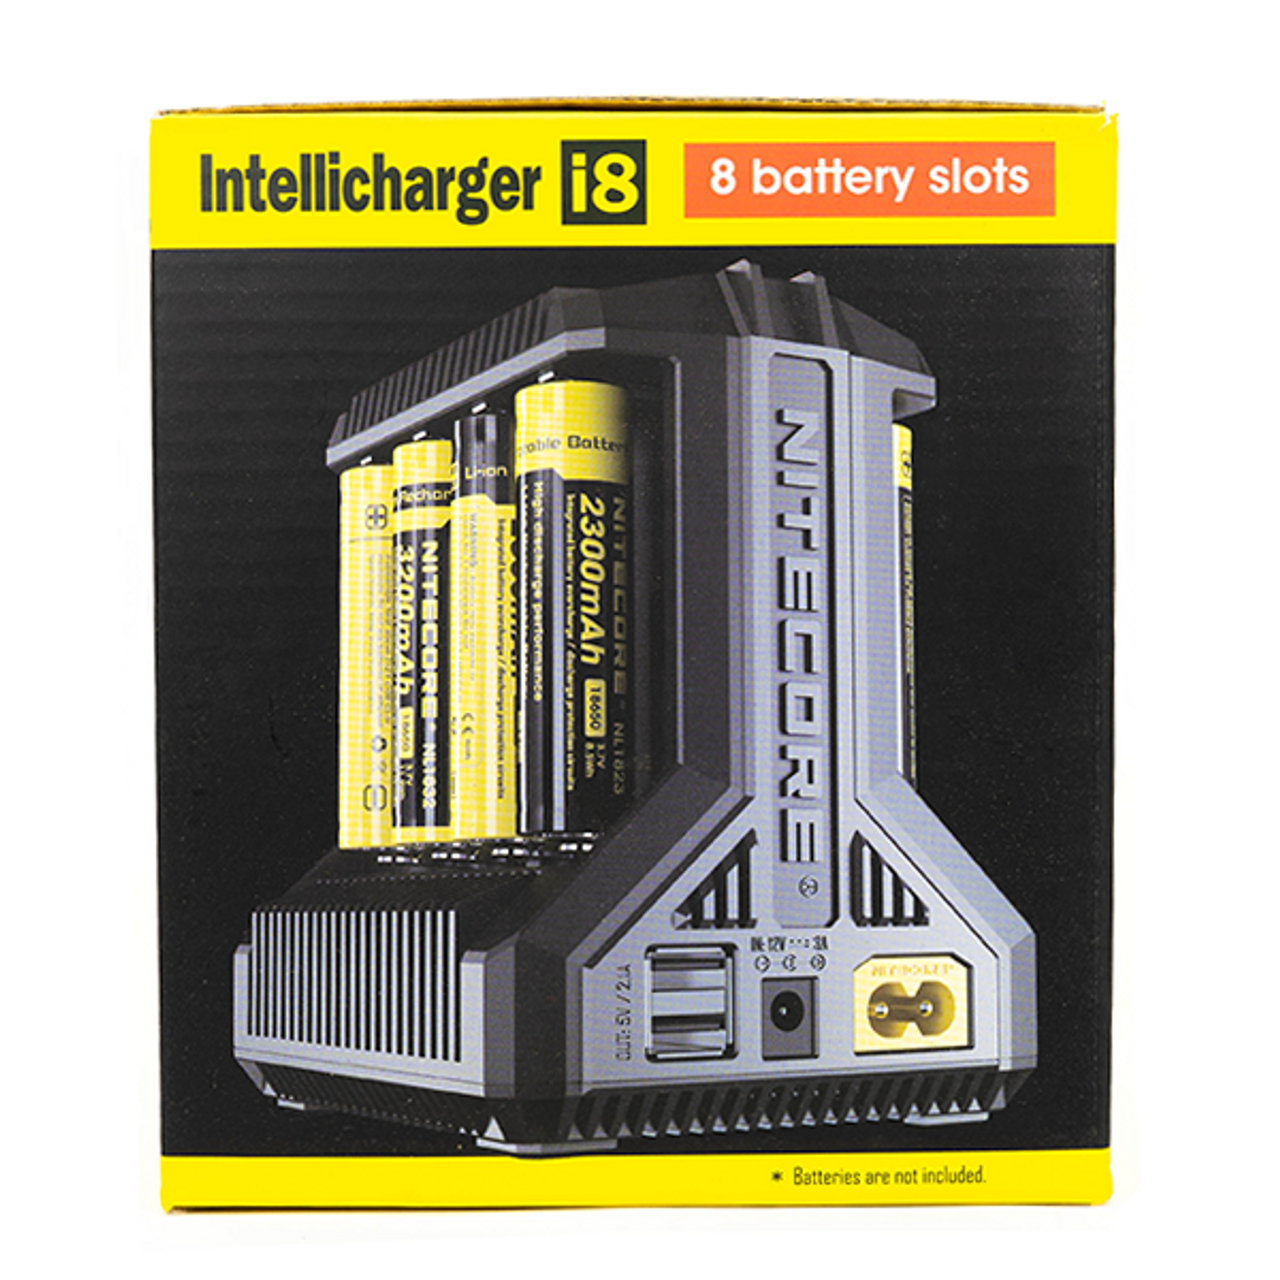 Nitecore I8 Charger - 8 Bay IMR Li-ion Battery Charger packaging only